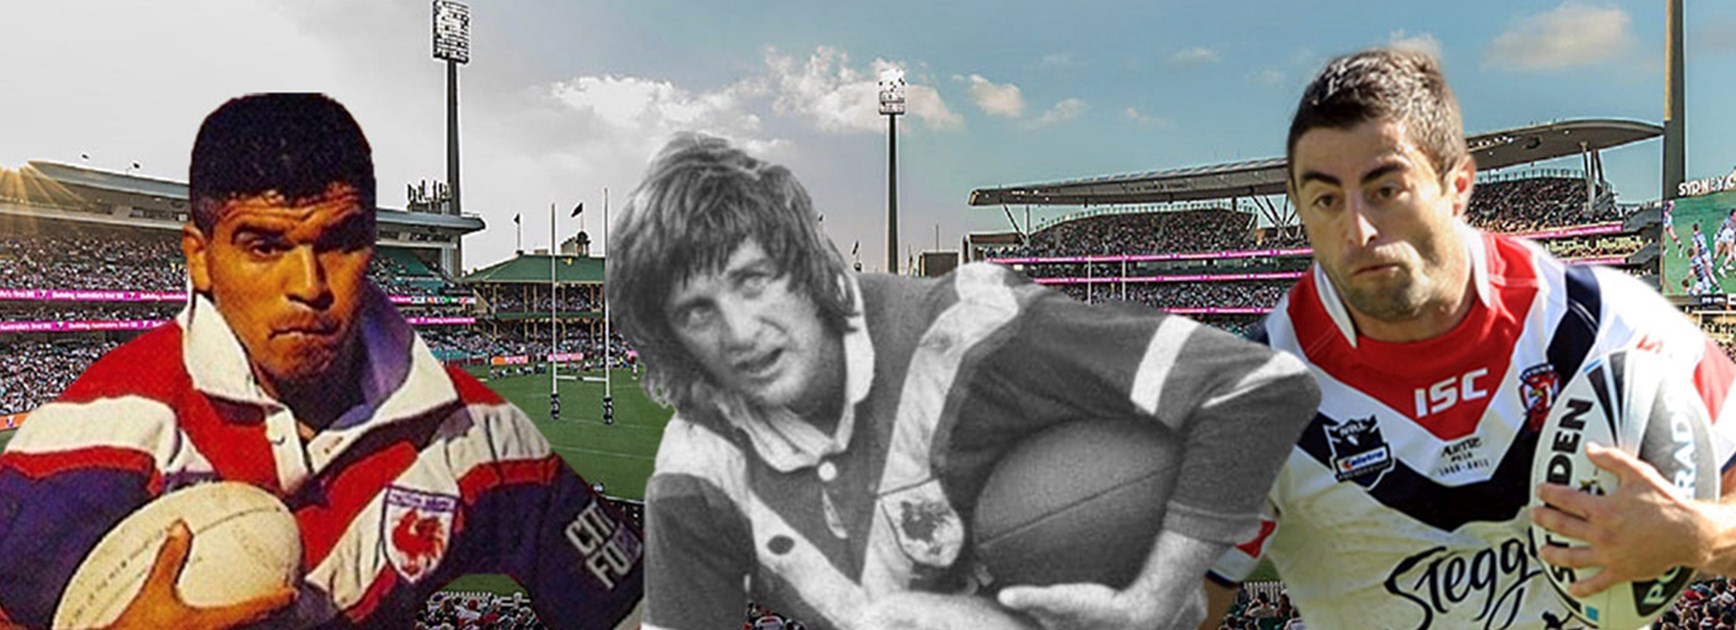 Speckle's Historic Roosters Vote | Fullback